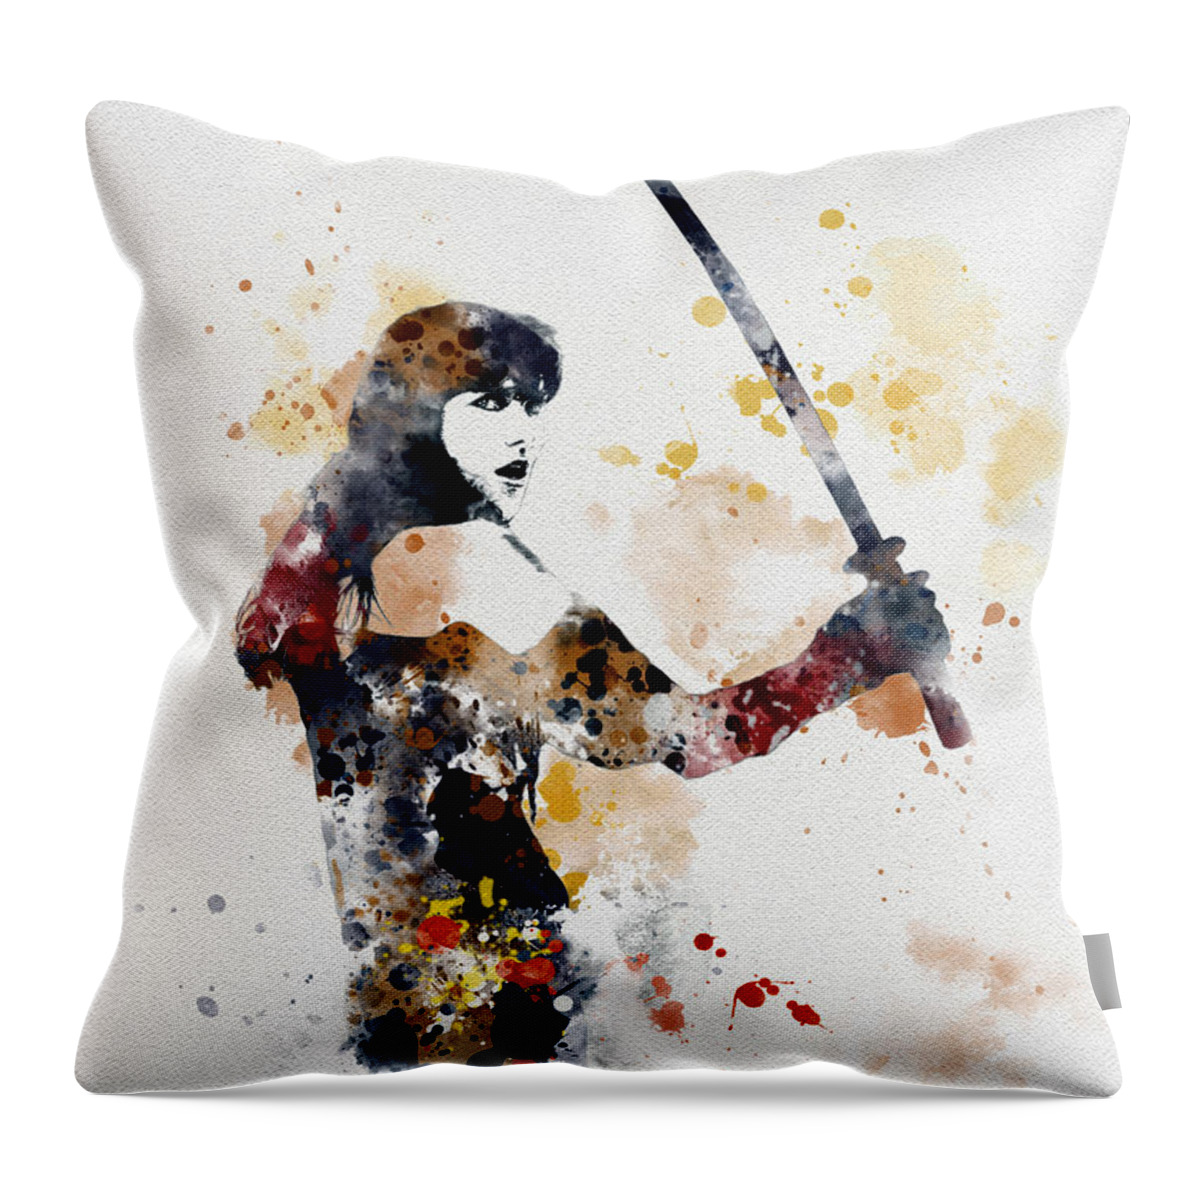 Xena Throw Pillow featuring the mixed media Xena by My Inspiration